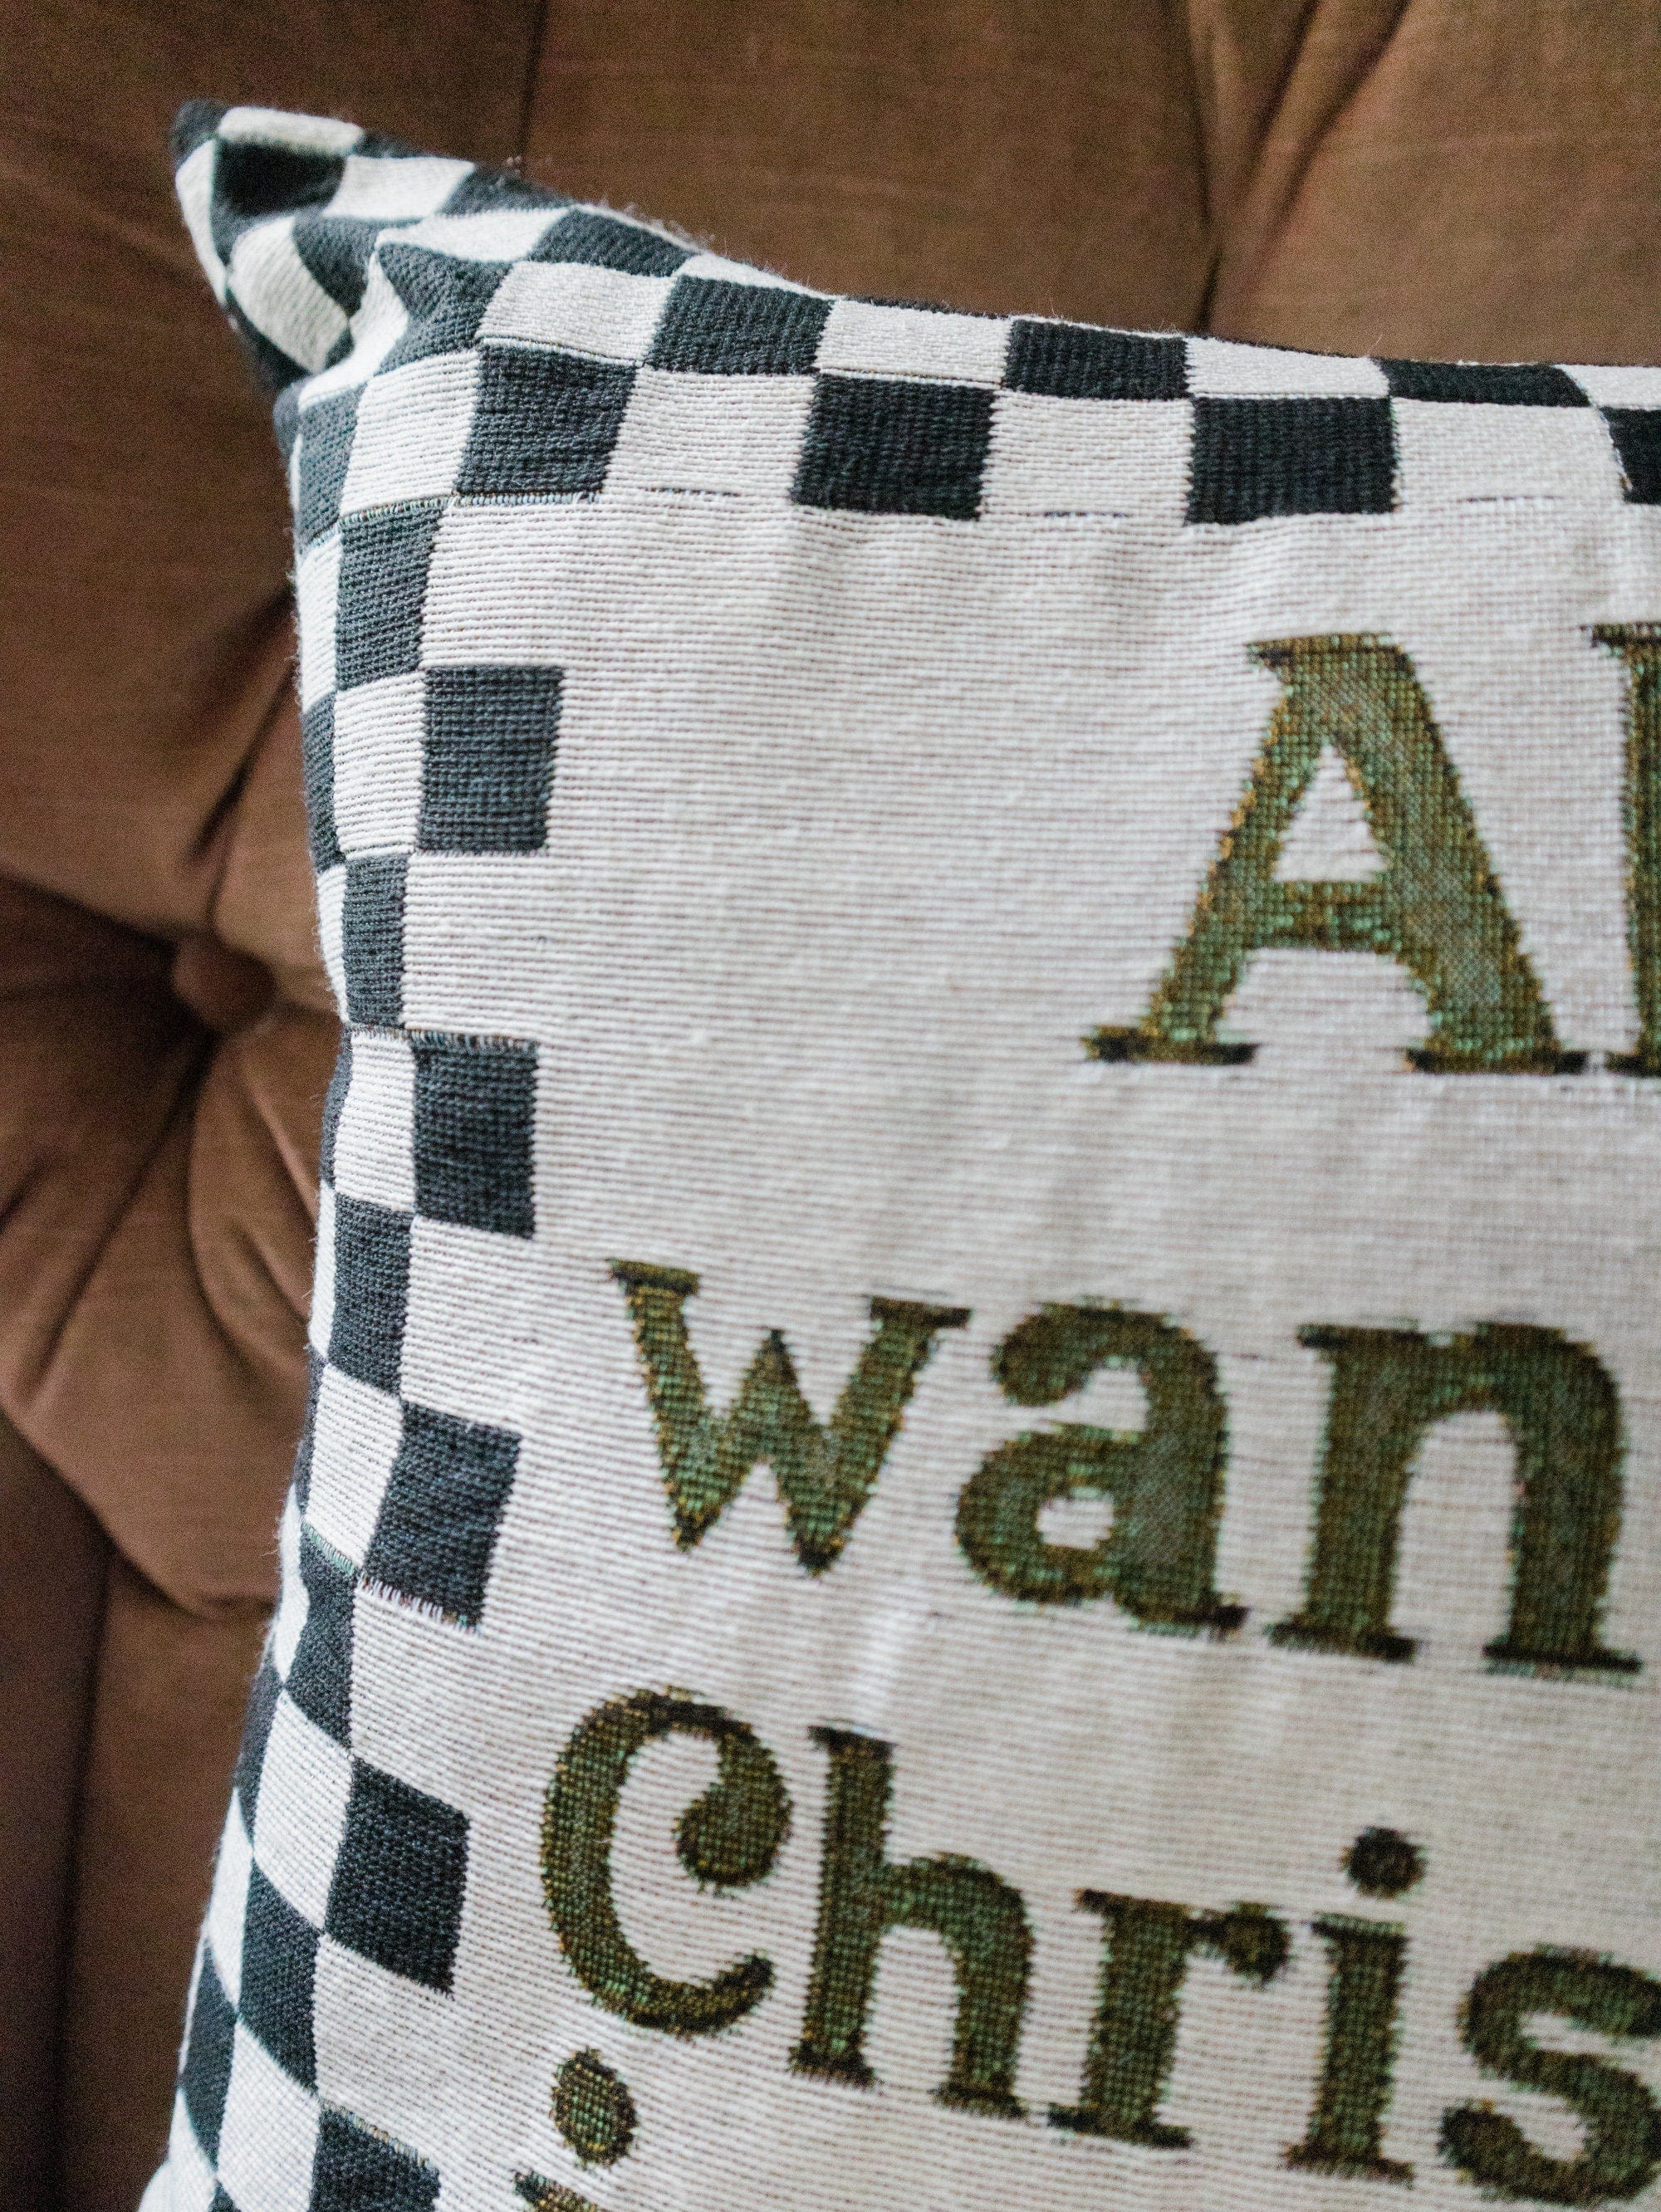 Christmas Pillow: All I Want is You